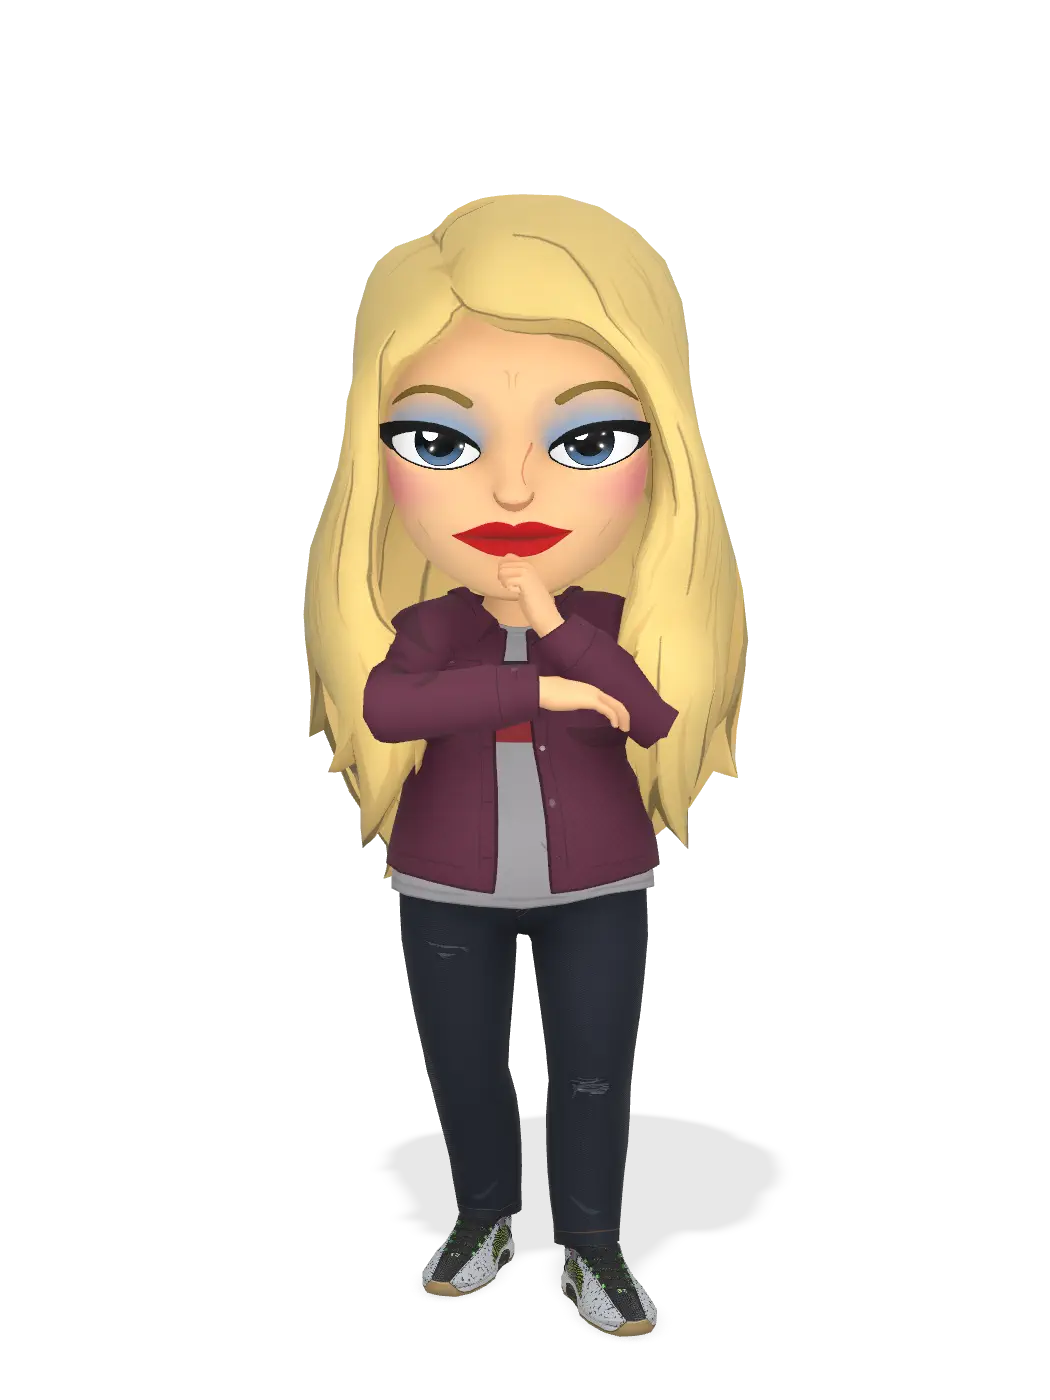 3D Bitmoji for charger-pride